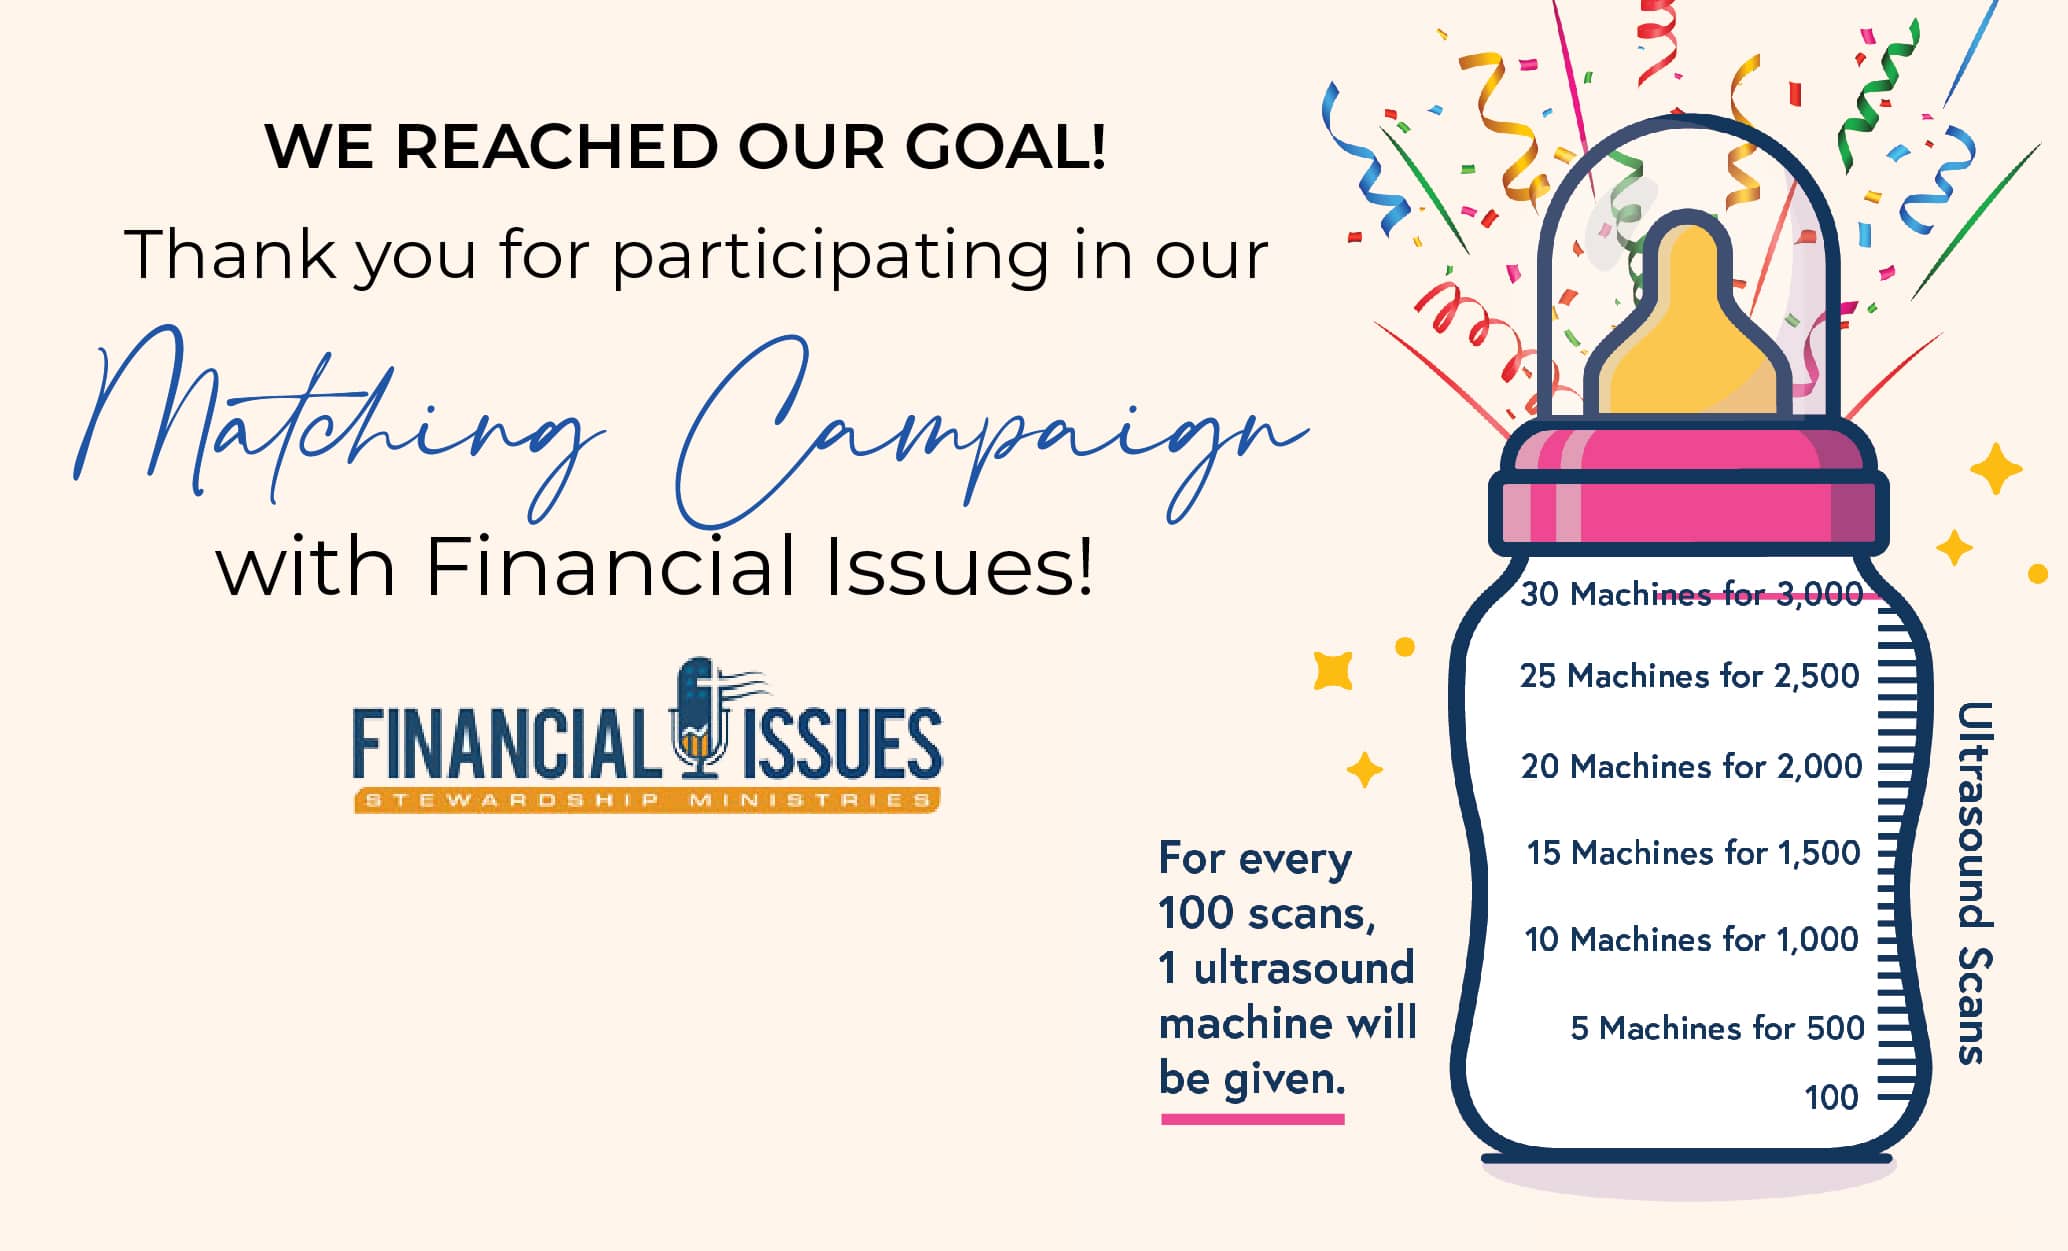 Participate in our Matching Campaign with Financial issues! For Every 100 scans, 1 ultrasound machine will be given.